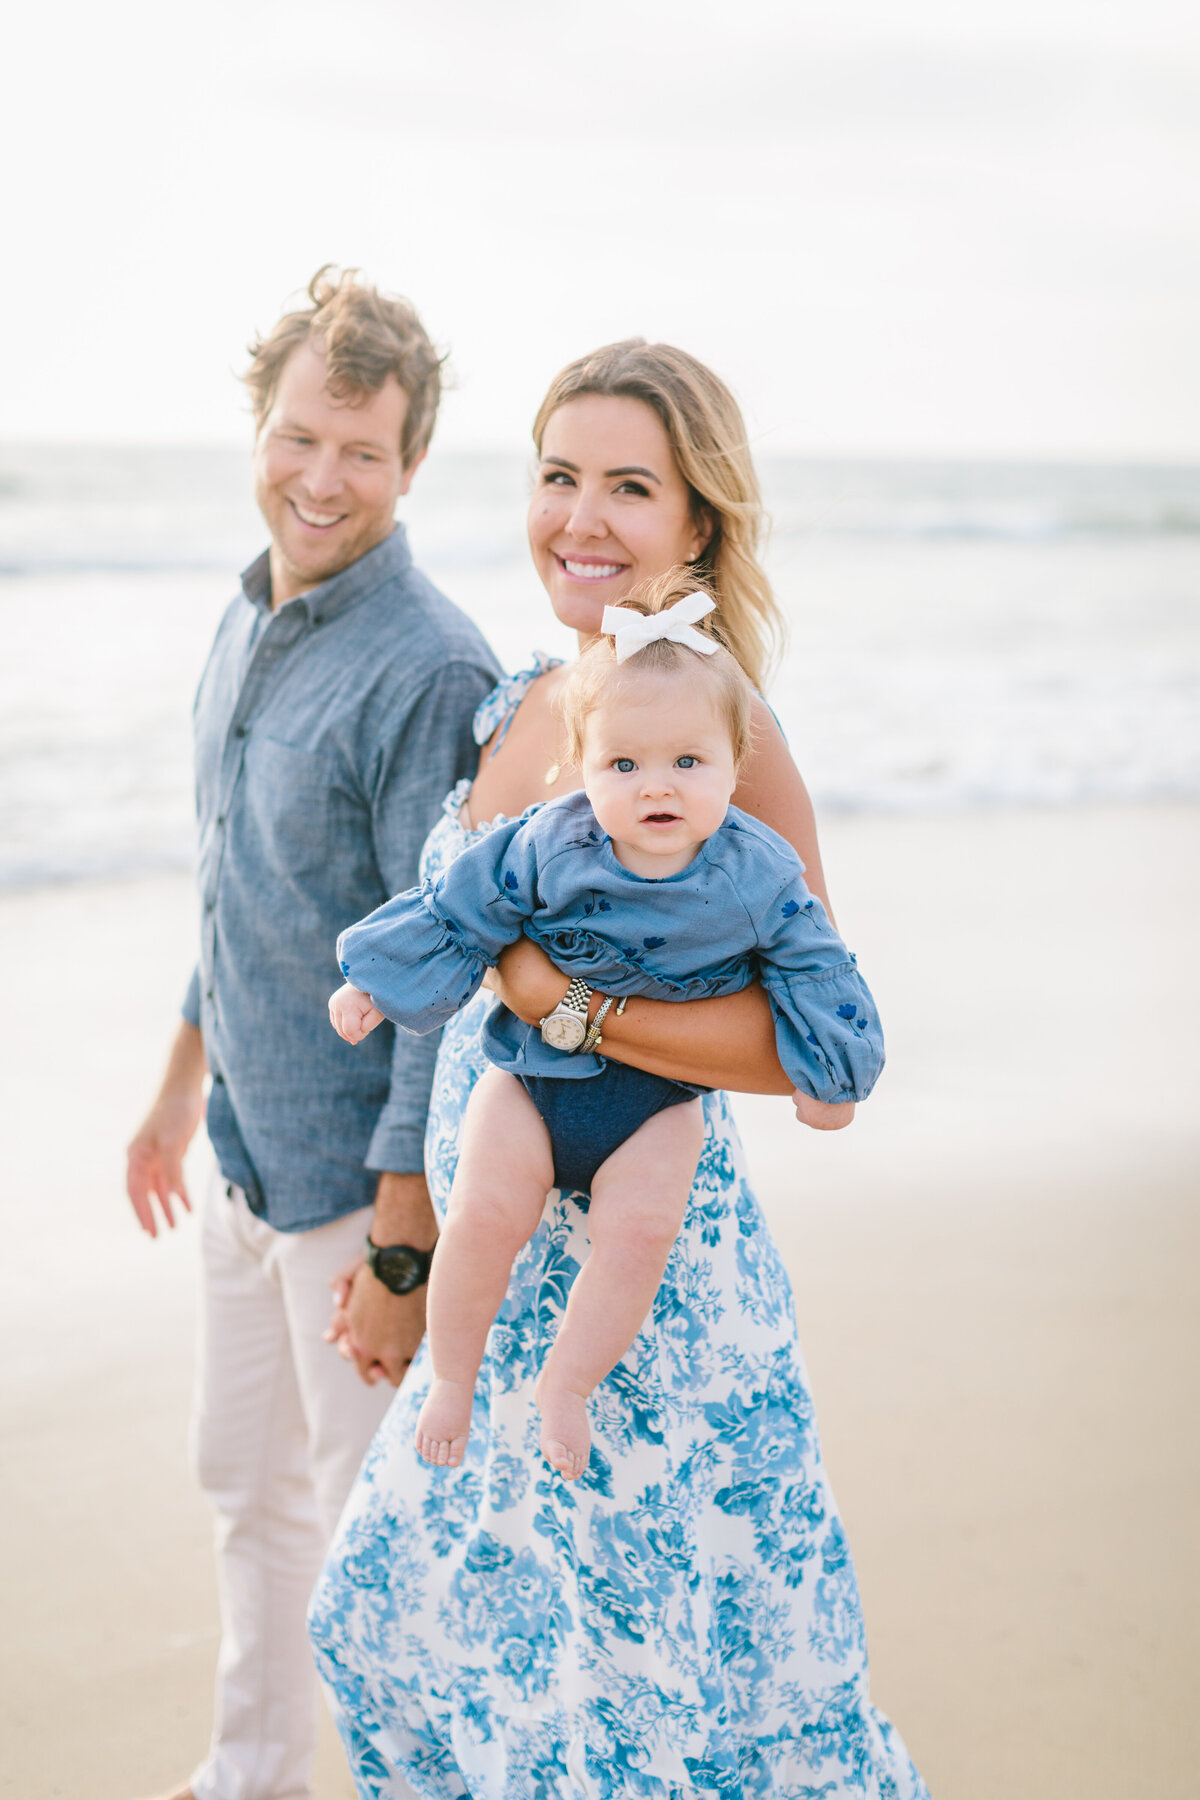 Best California and Texas Family Photographer-Jodee Debes Photography-190